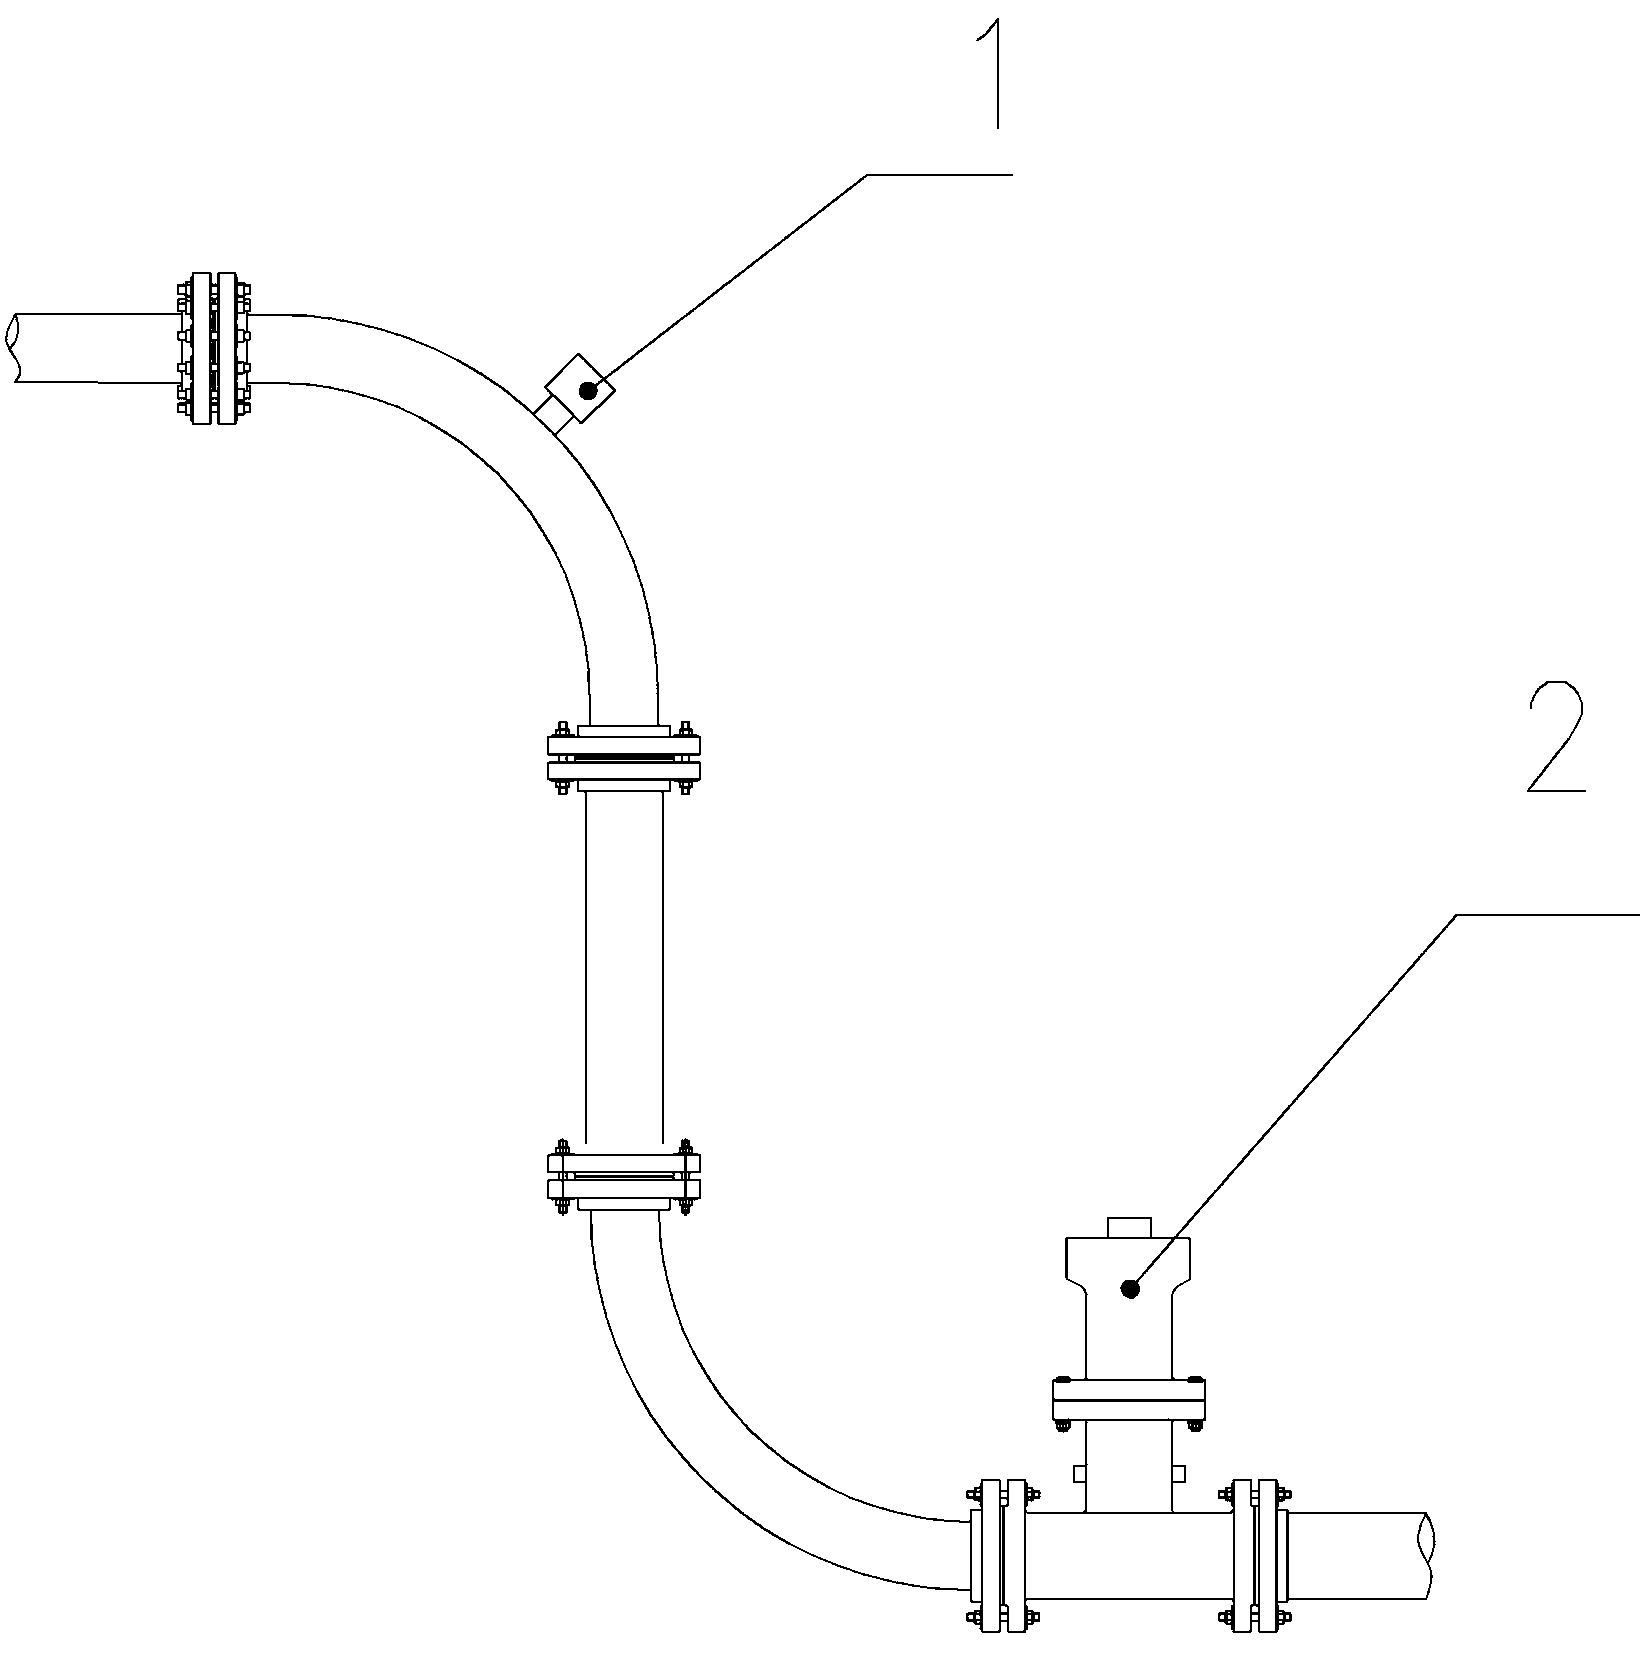 Control method for emptying air in underground filling riser by using cut-off valve